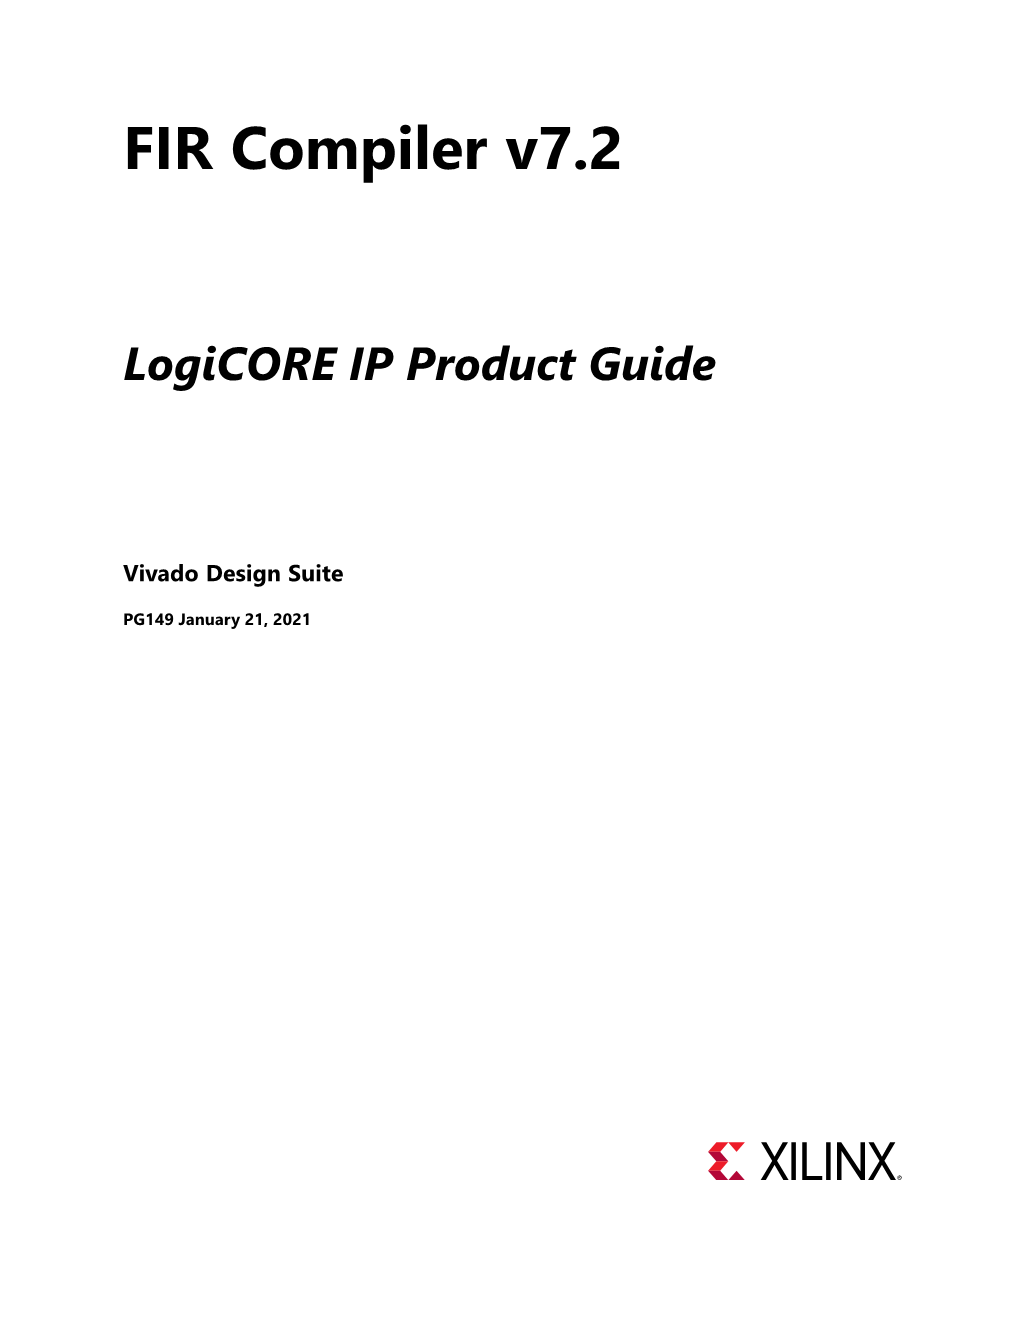 FIR Compiler V7.2 Logicore IP Product Guide